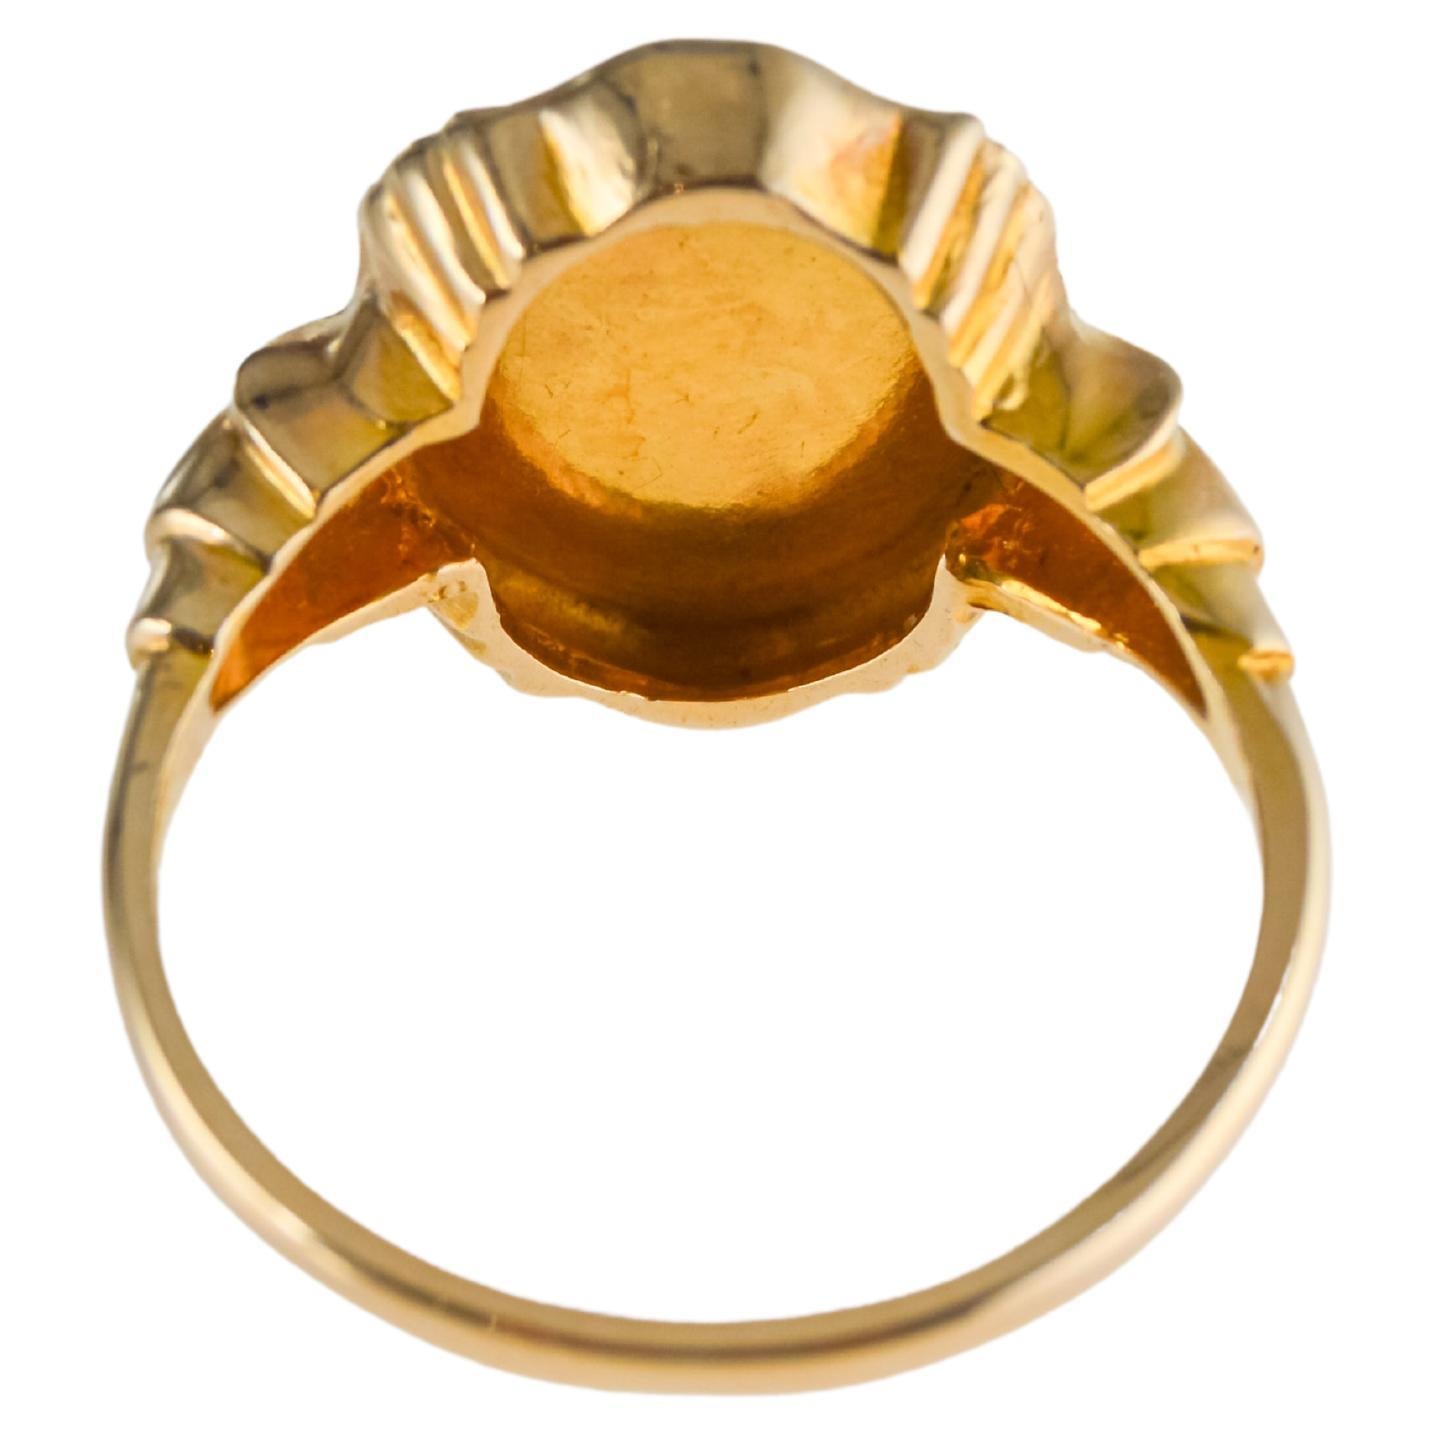 Solid 10Kt. Gold Art Deco Die Struck School Ring Hand Constructed from 1940's For Sale 1